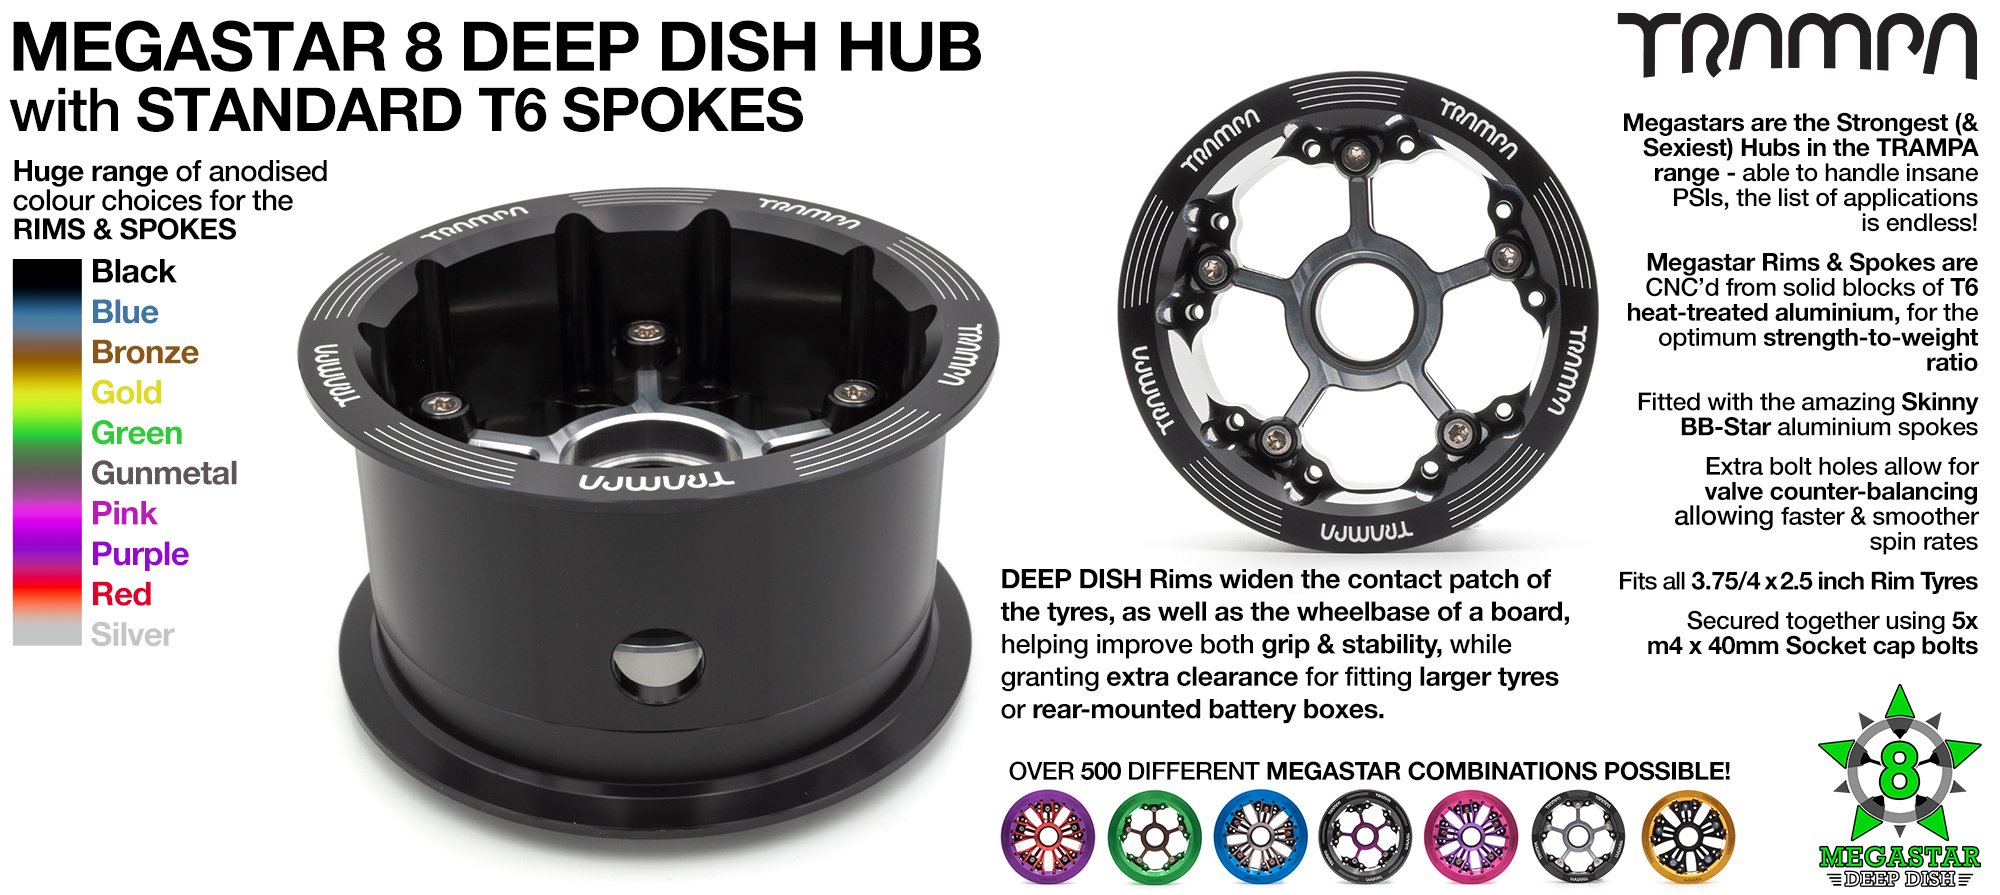 Deep-Dish MEGASTAR 8 BLACK 3.75 x 2.5 Inch - Fits Pneumatic tyres up to 8 Inches in outer diameter  